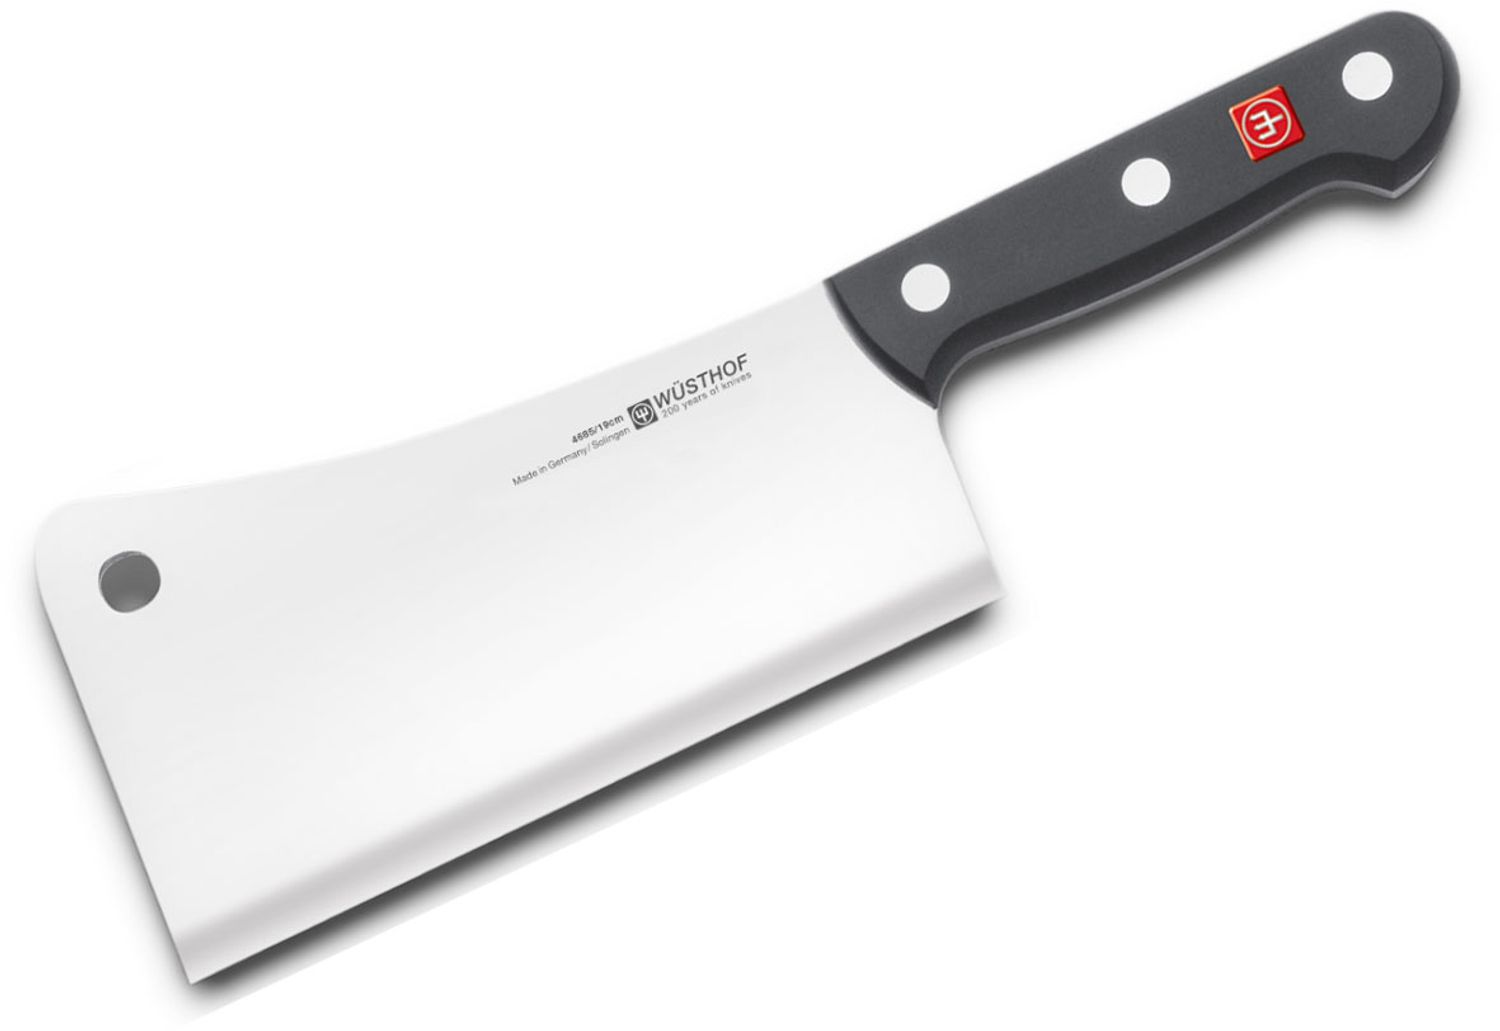 Wusthof Classic 7 Chinese Cleaver